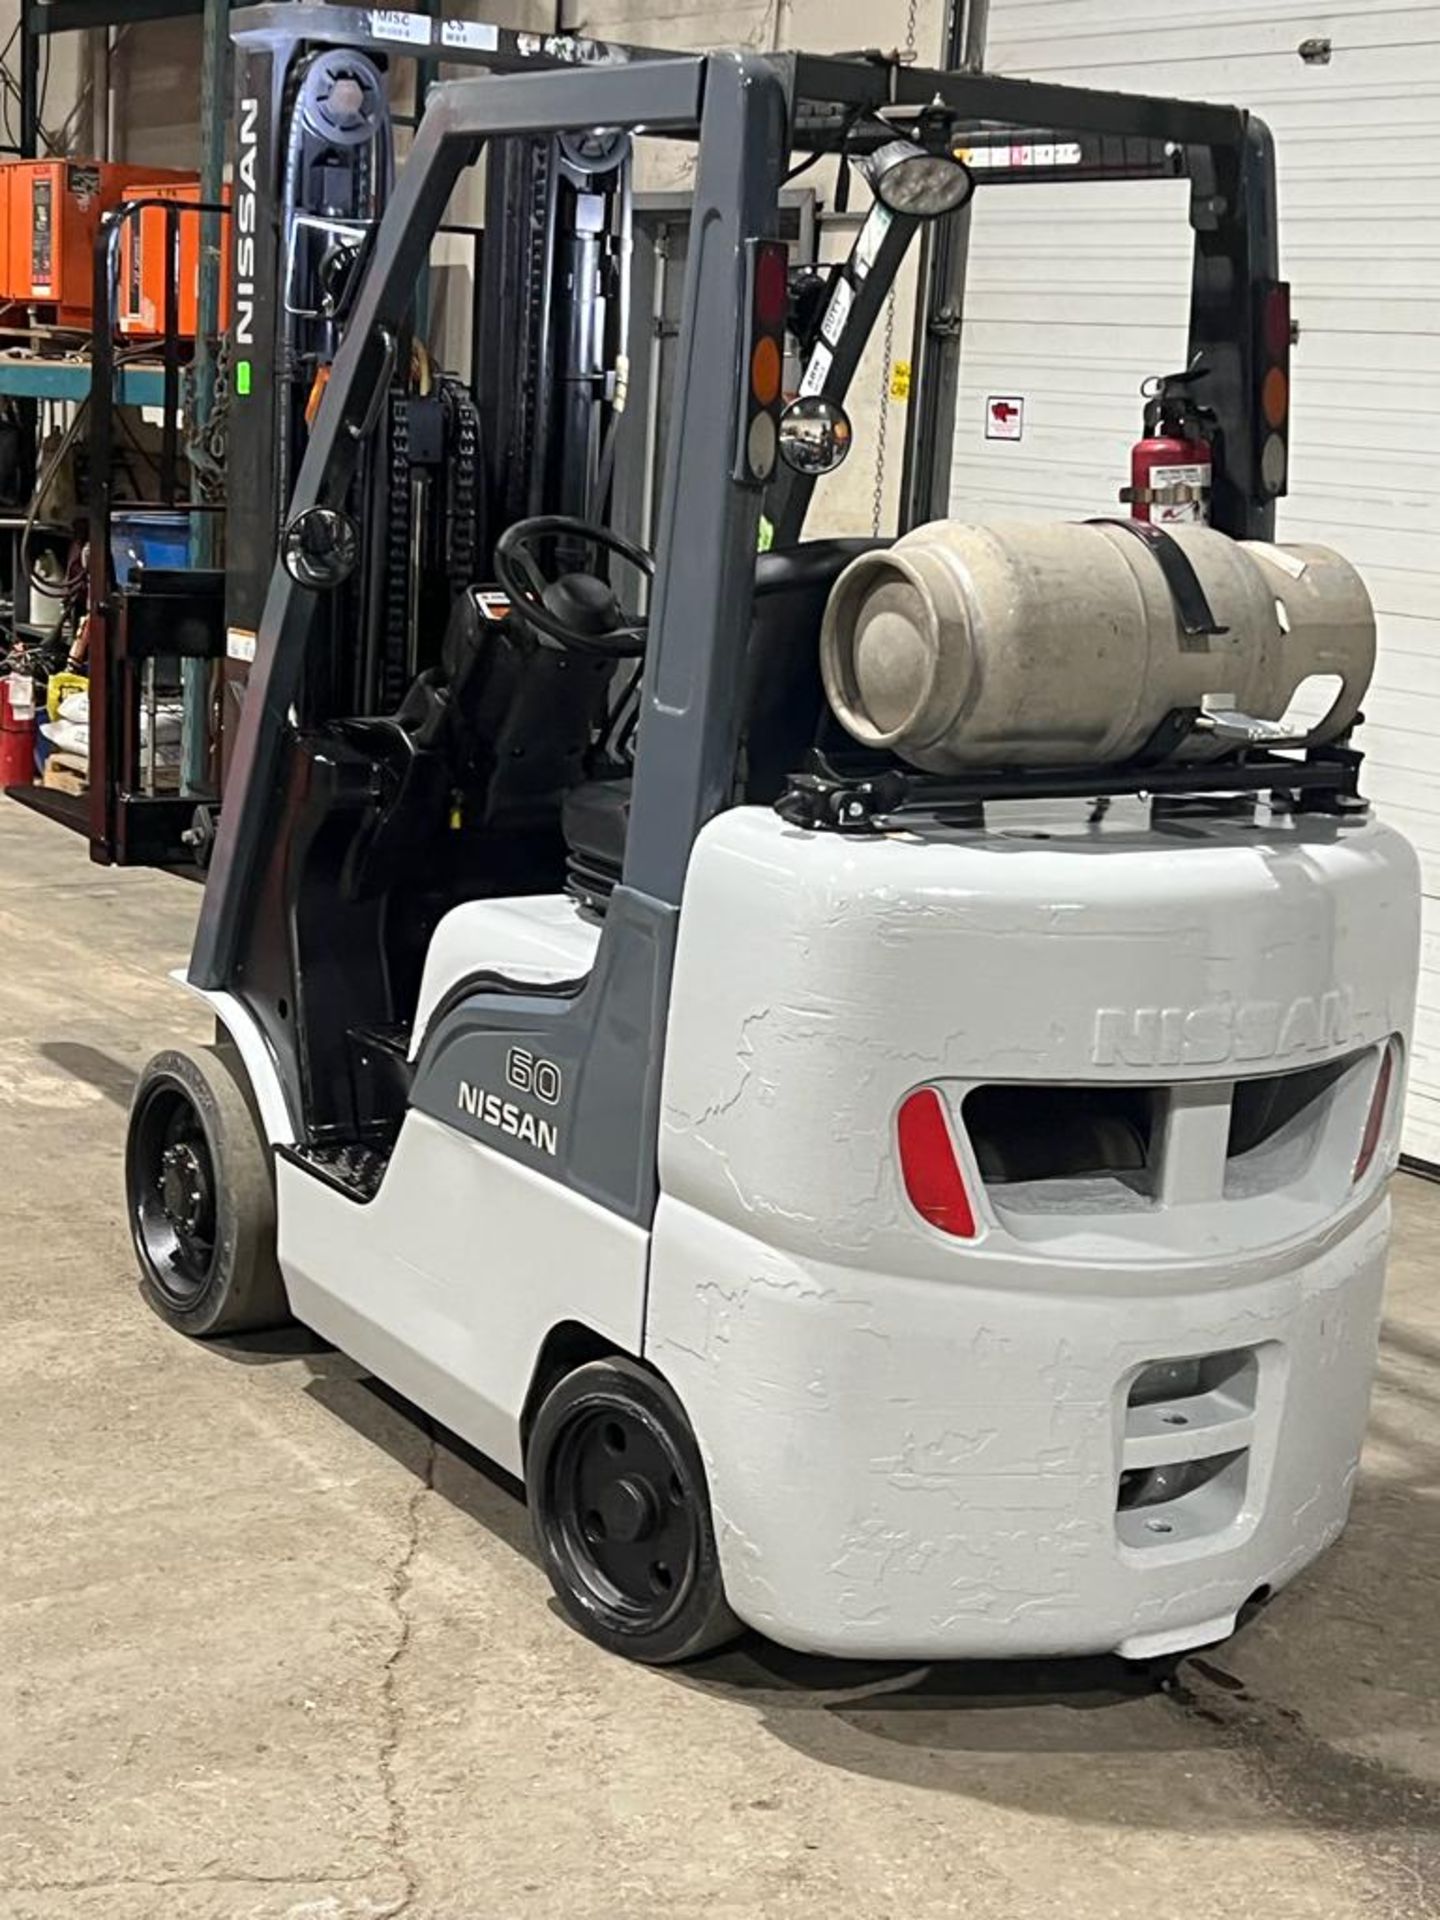 2013 Nissan 60 - 6,000lbs Capacity Forklift LPG (propane) with Sideshift & 3 stage mast with LOW - Image 4 of 4